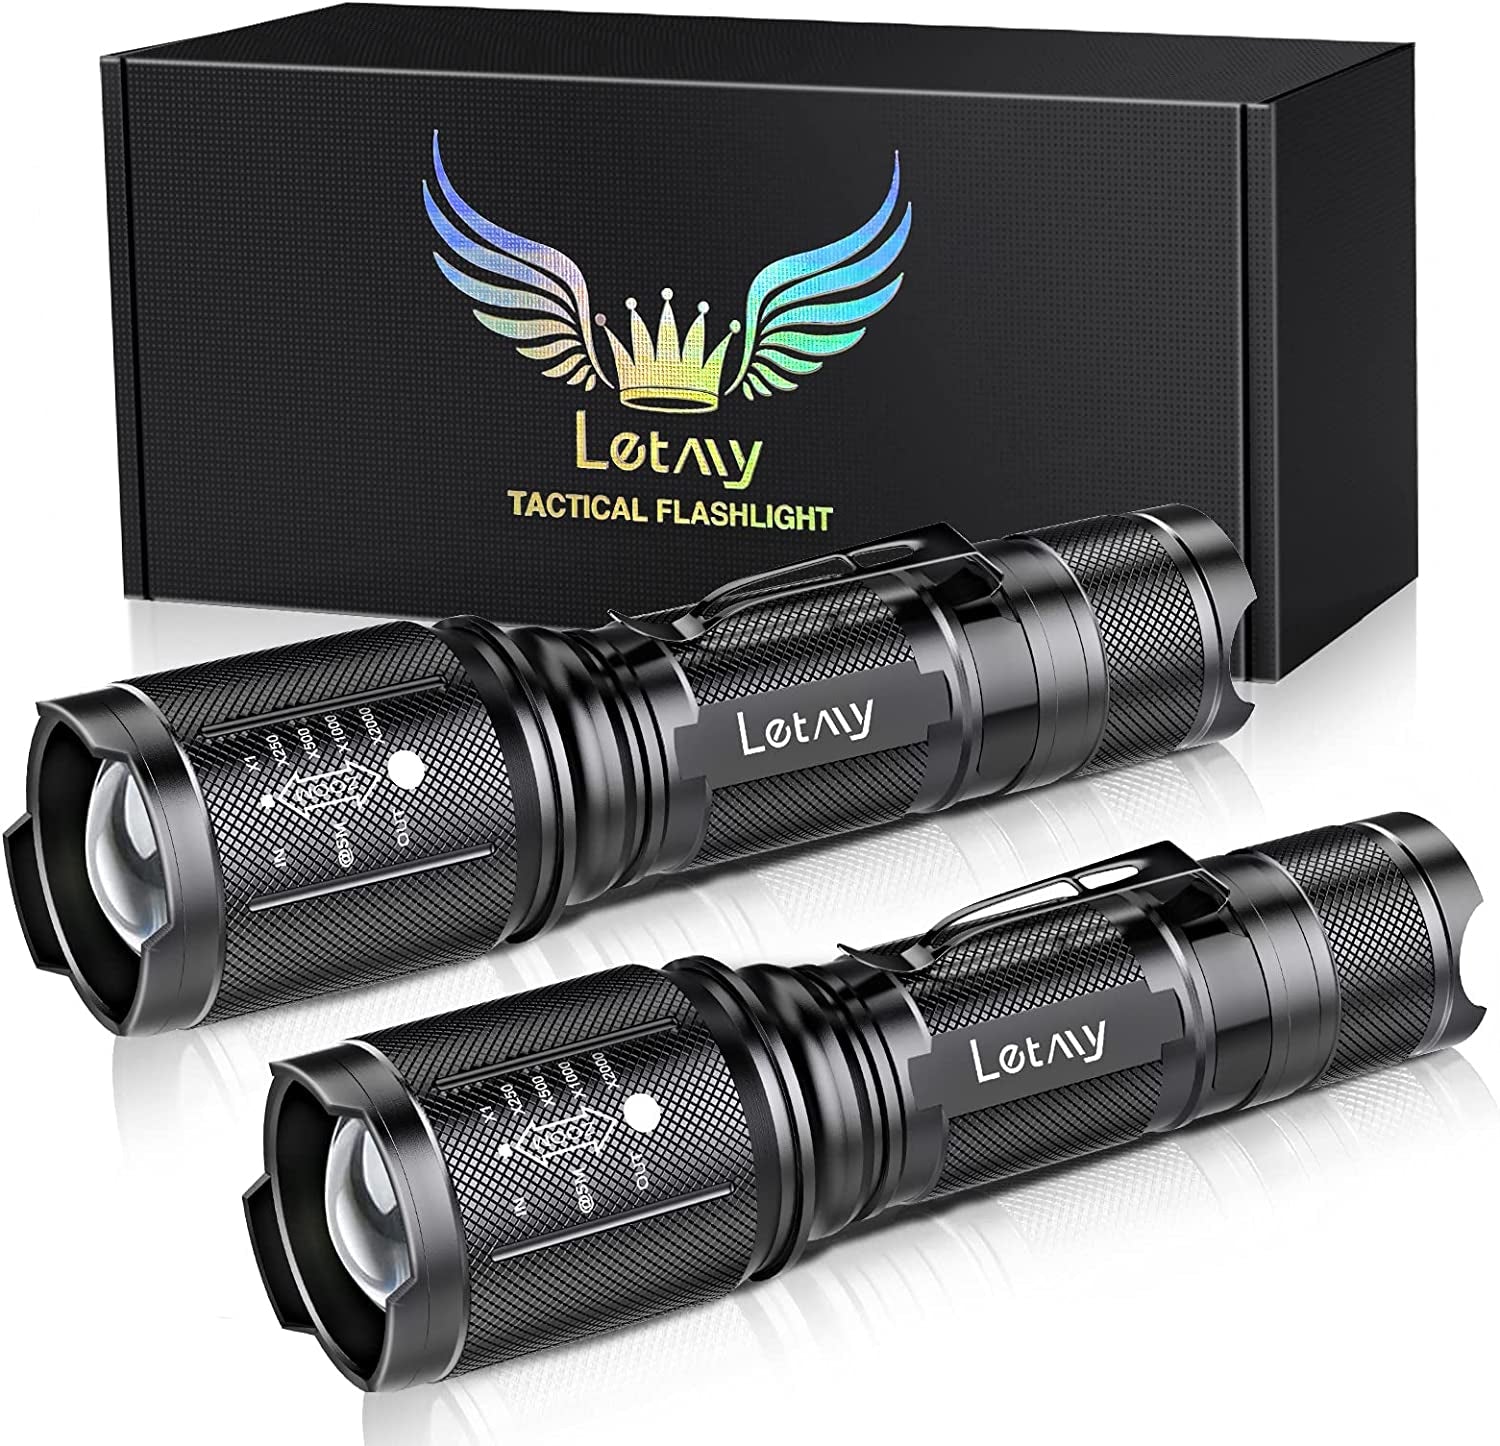 LED Tactical Flashlight S2000 PRO - 2Pcs Ultra Bright High Lumens LED Flashlights - Zoomable, 5 Modes Flashlights, Water Resistant Flash Light for Emergency, Hurricane Supplies, Camping